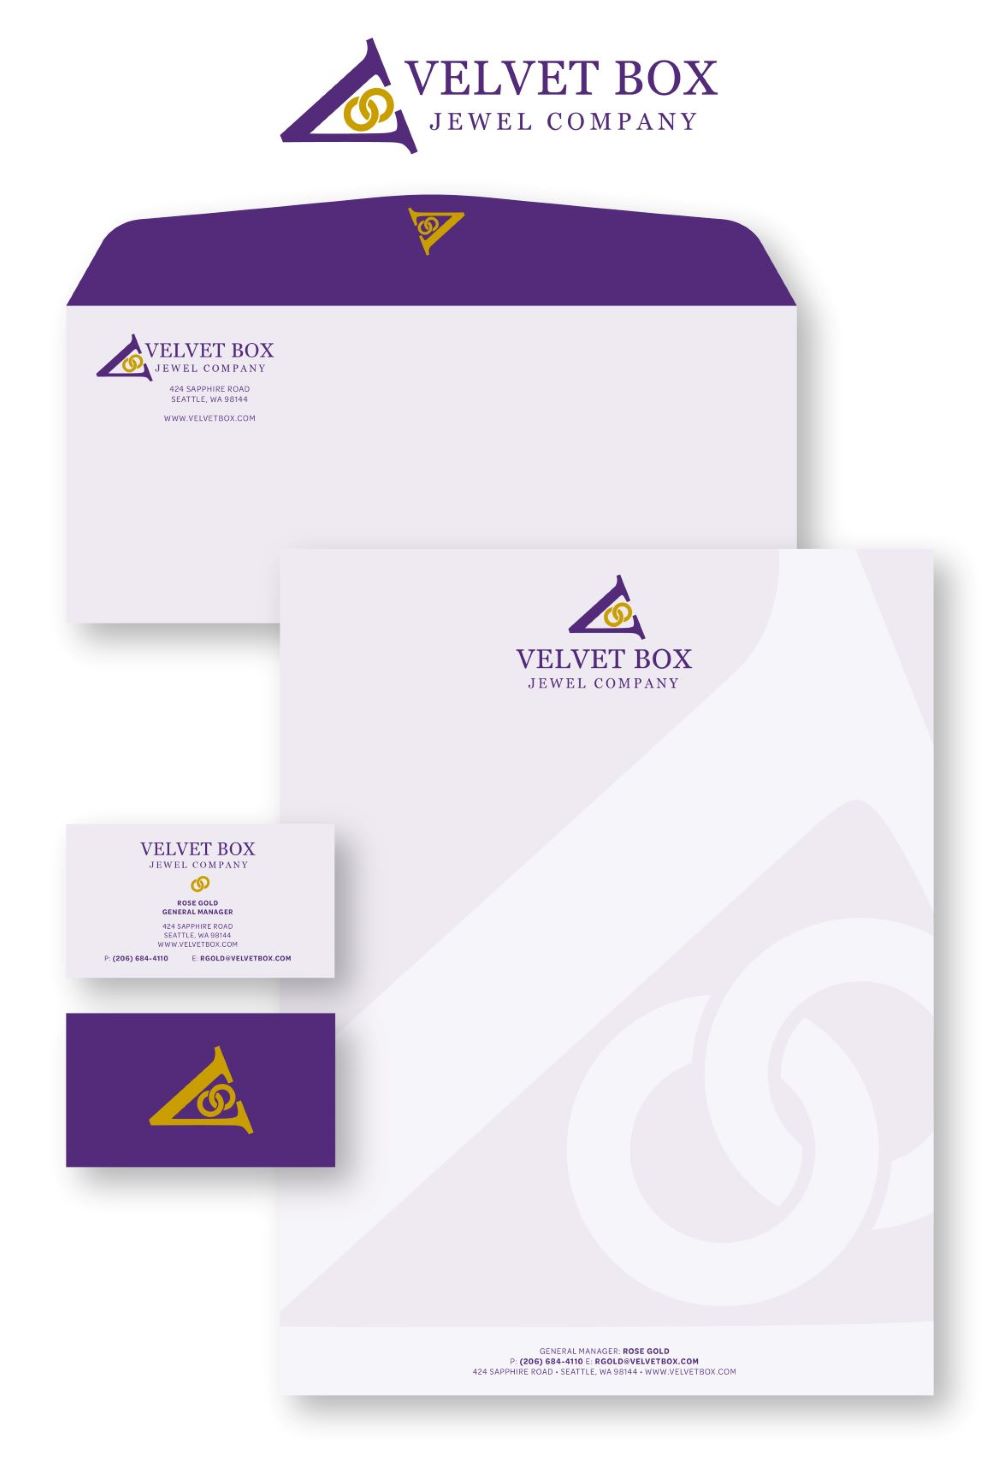 Velvet Box identity package with purple and gold envelope, letterhead, and business card